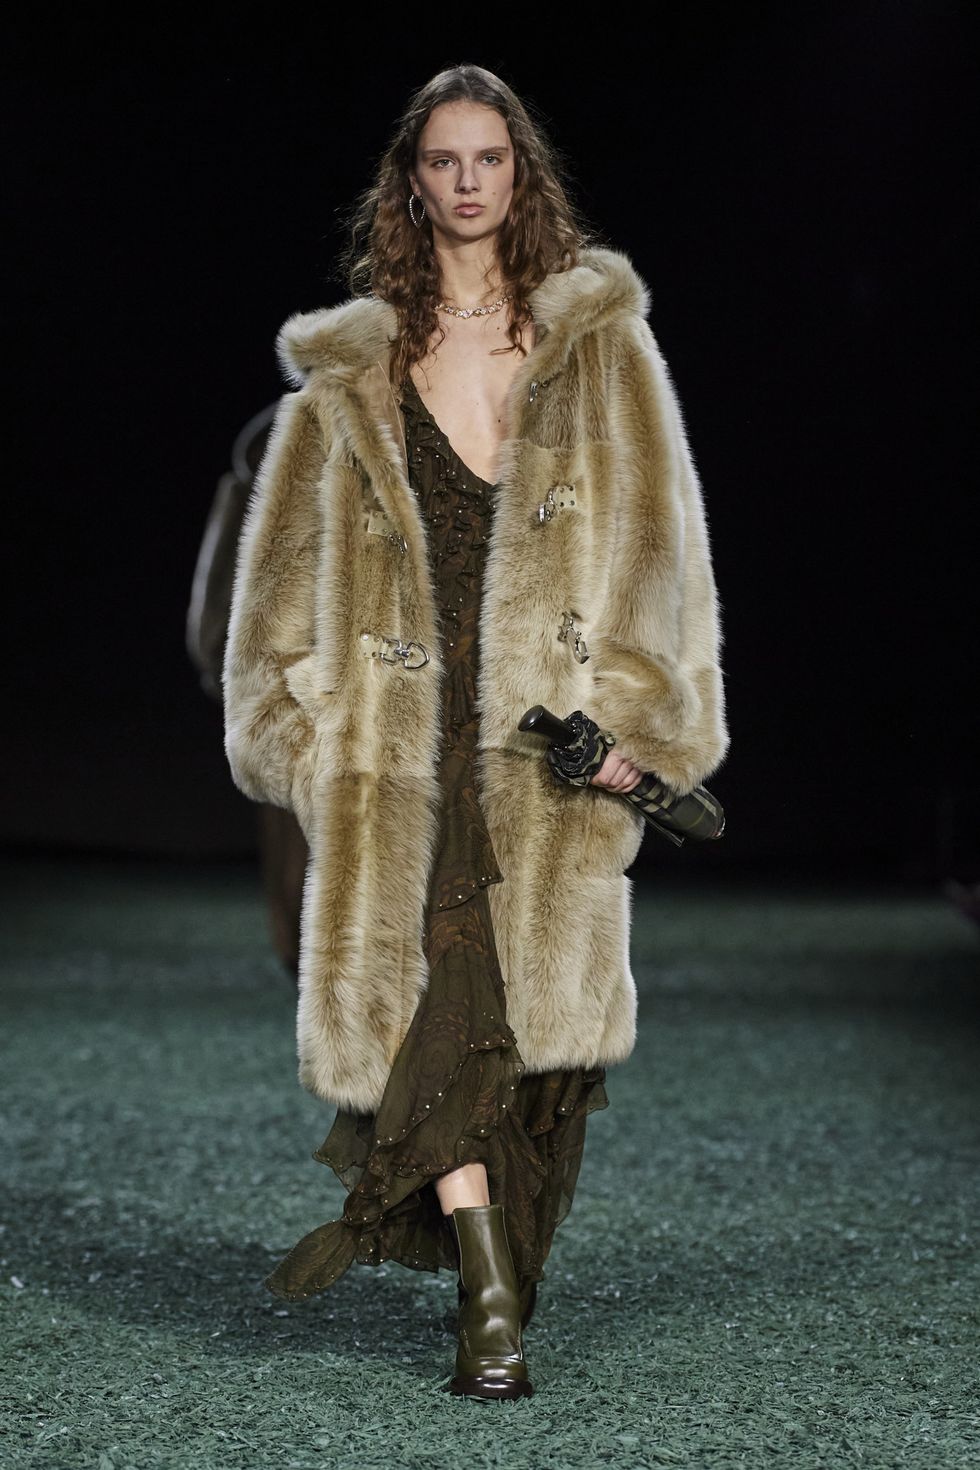 a person wearing a fur coat and boots